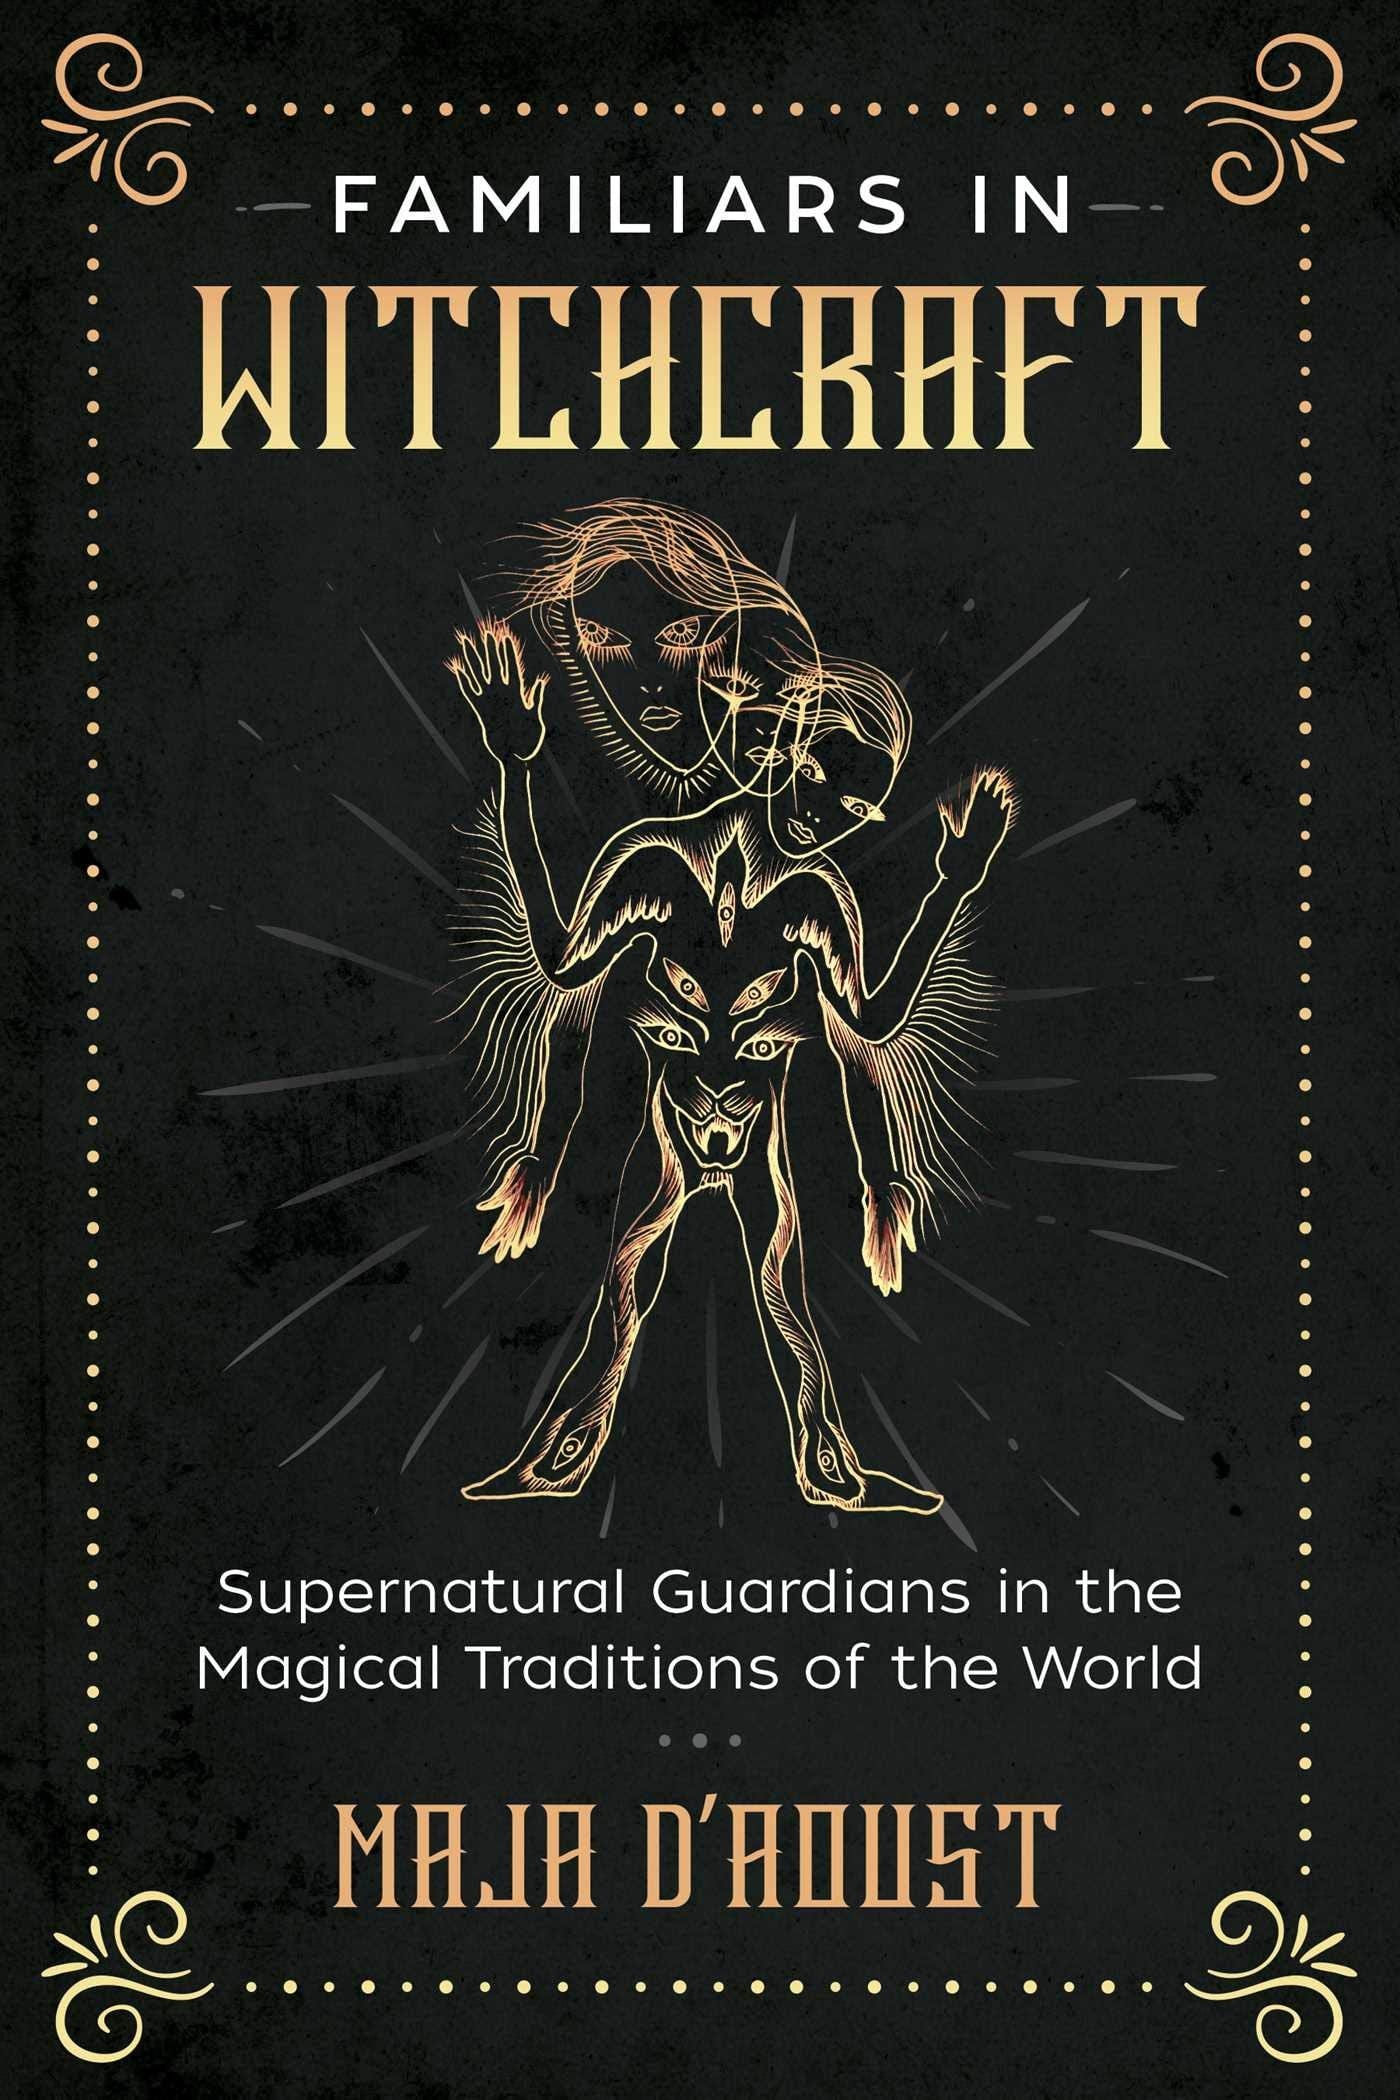 Familiars in Witchcraft: Supernatural Guardians in the Magical Traditions of the World - Third Eye